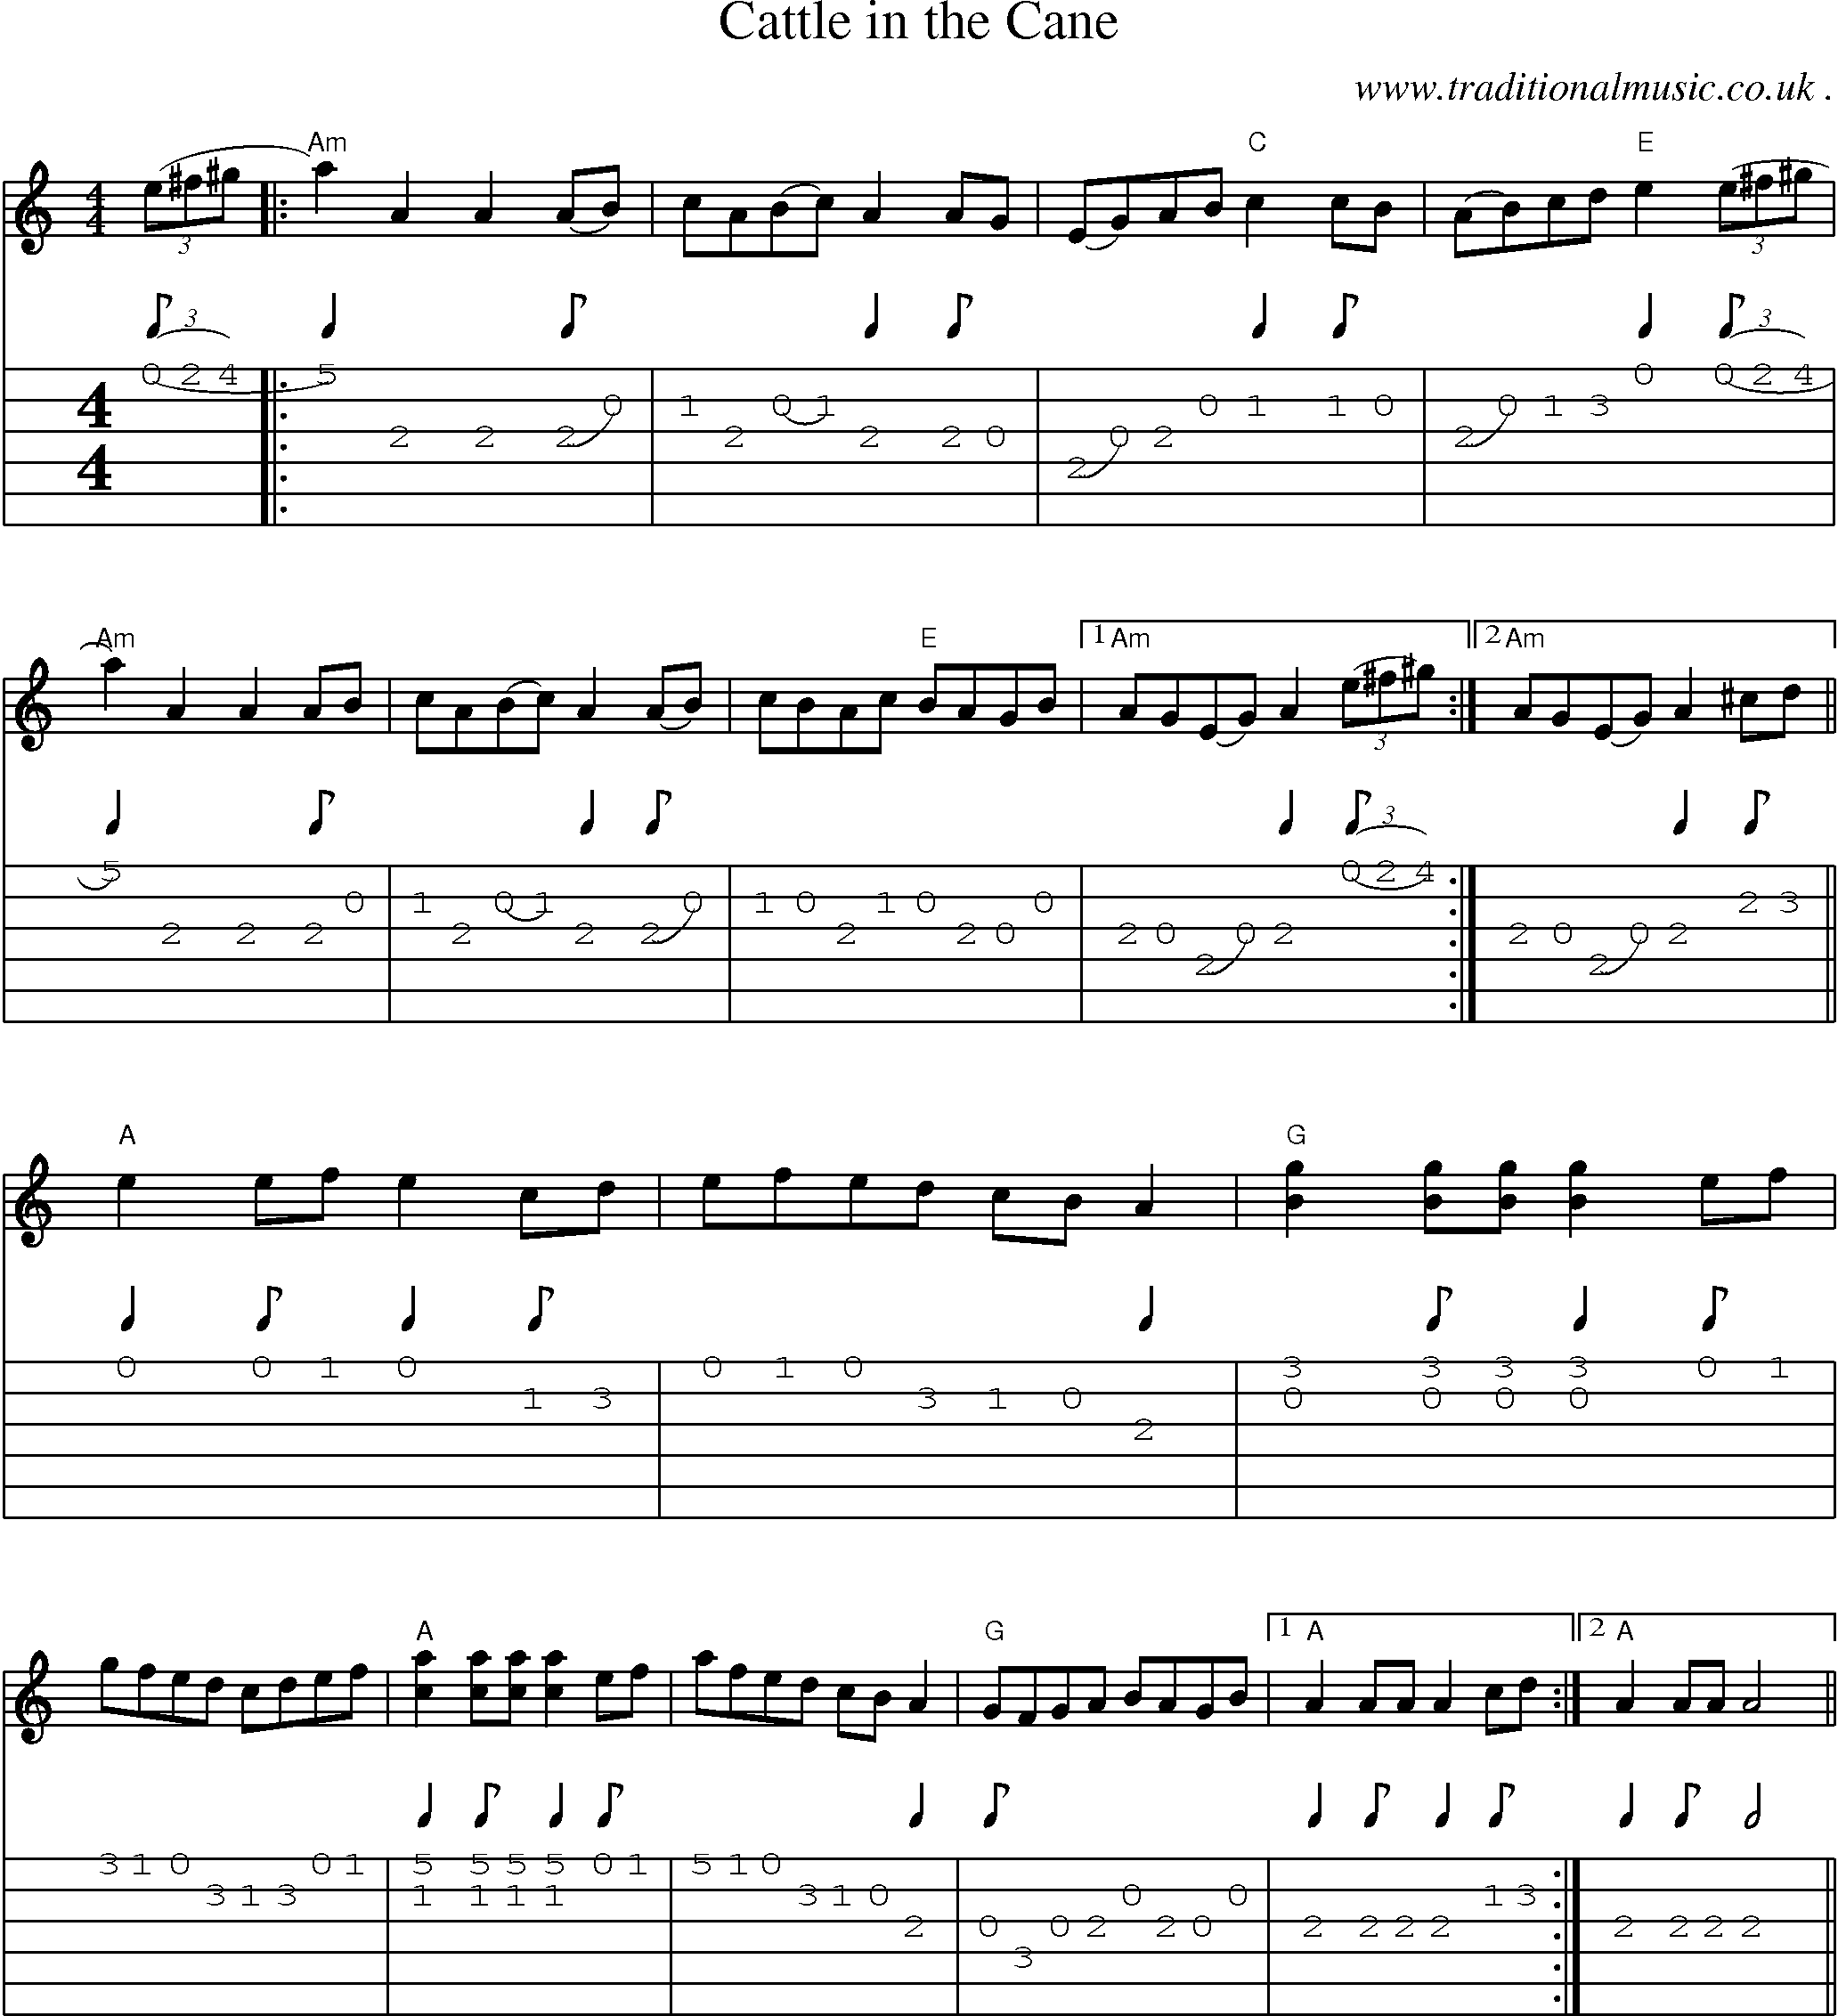 Music Score and Guitar Tabs for Cattle In The Cane